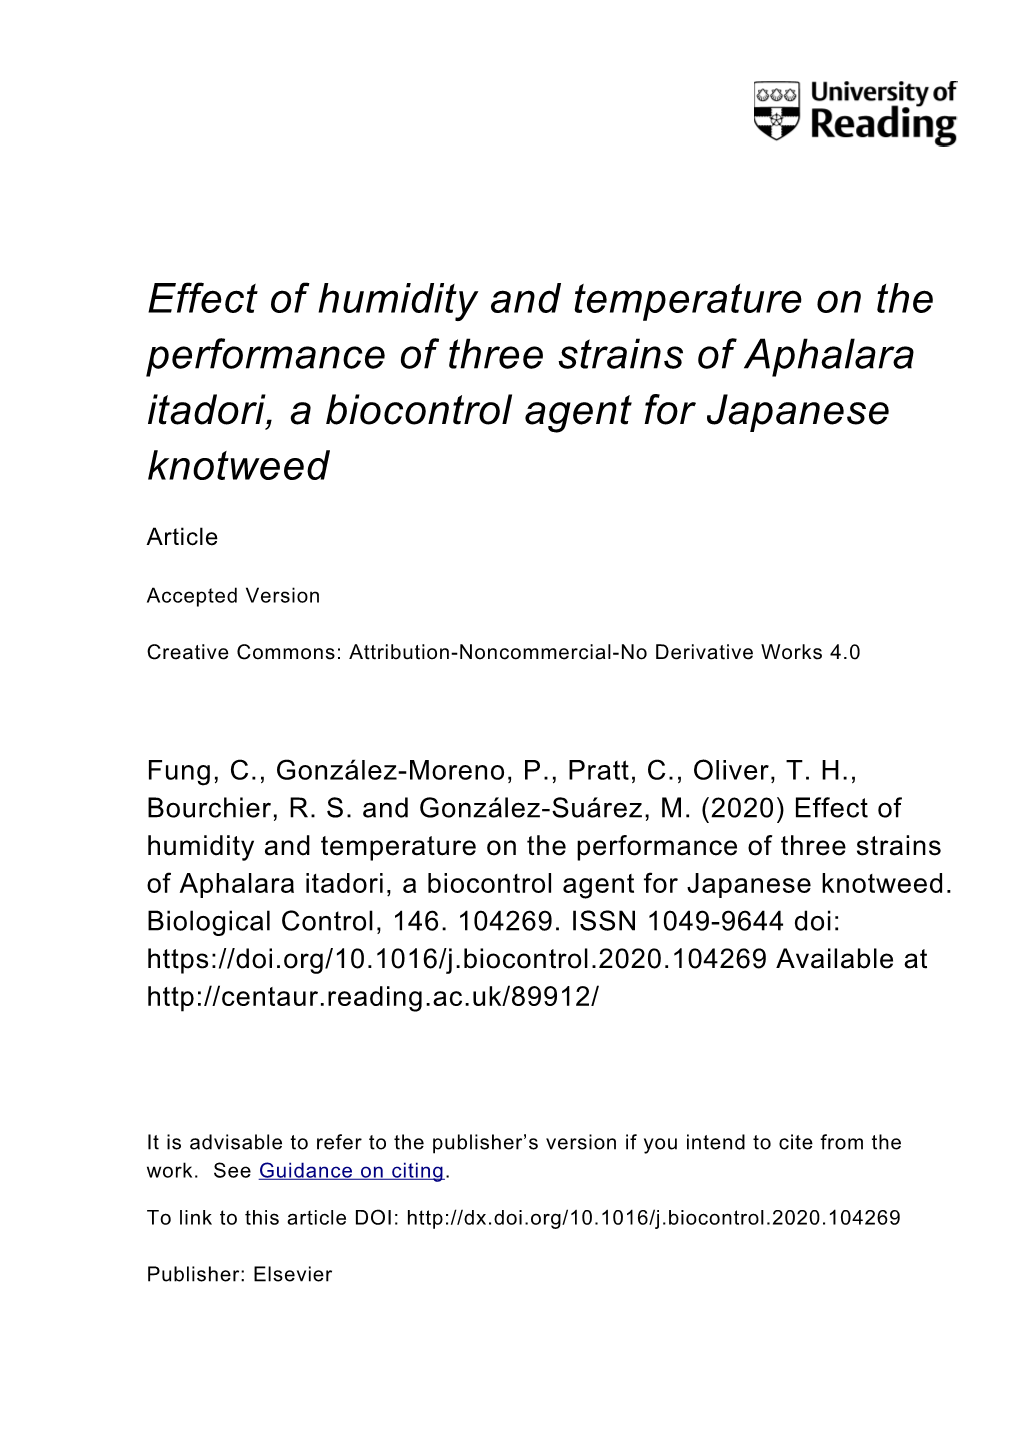 Effect of Humidity and Temperature on the Performance of Three Strains of Aphalara Itadori, a Biocontrol Agent for Japanese Knotweed